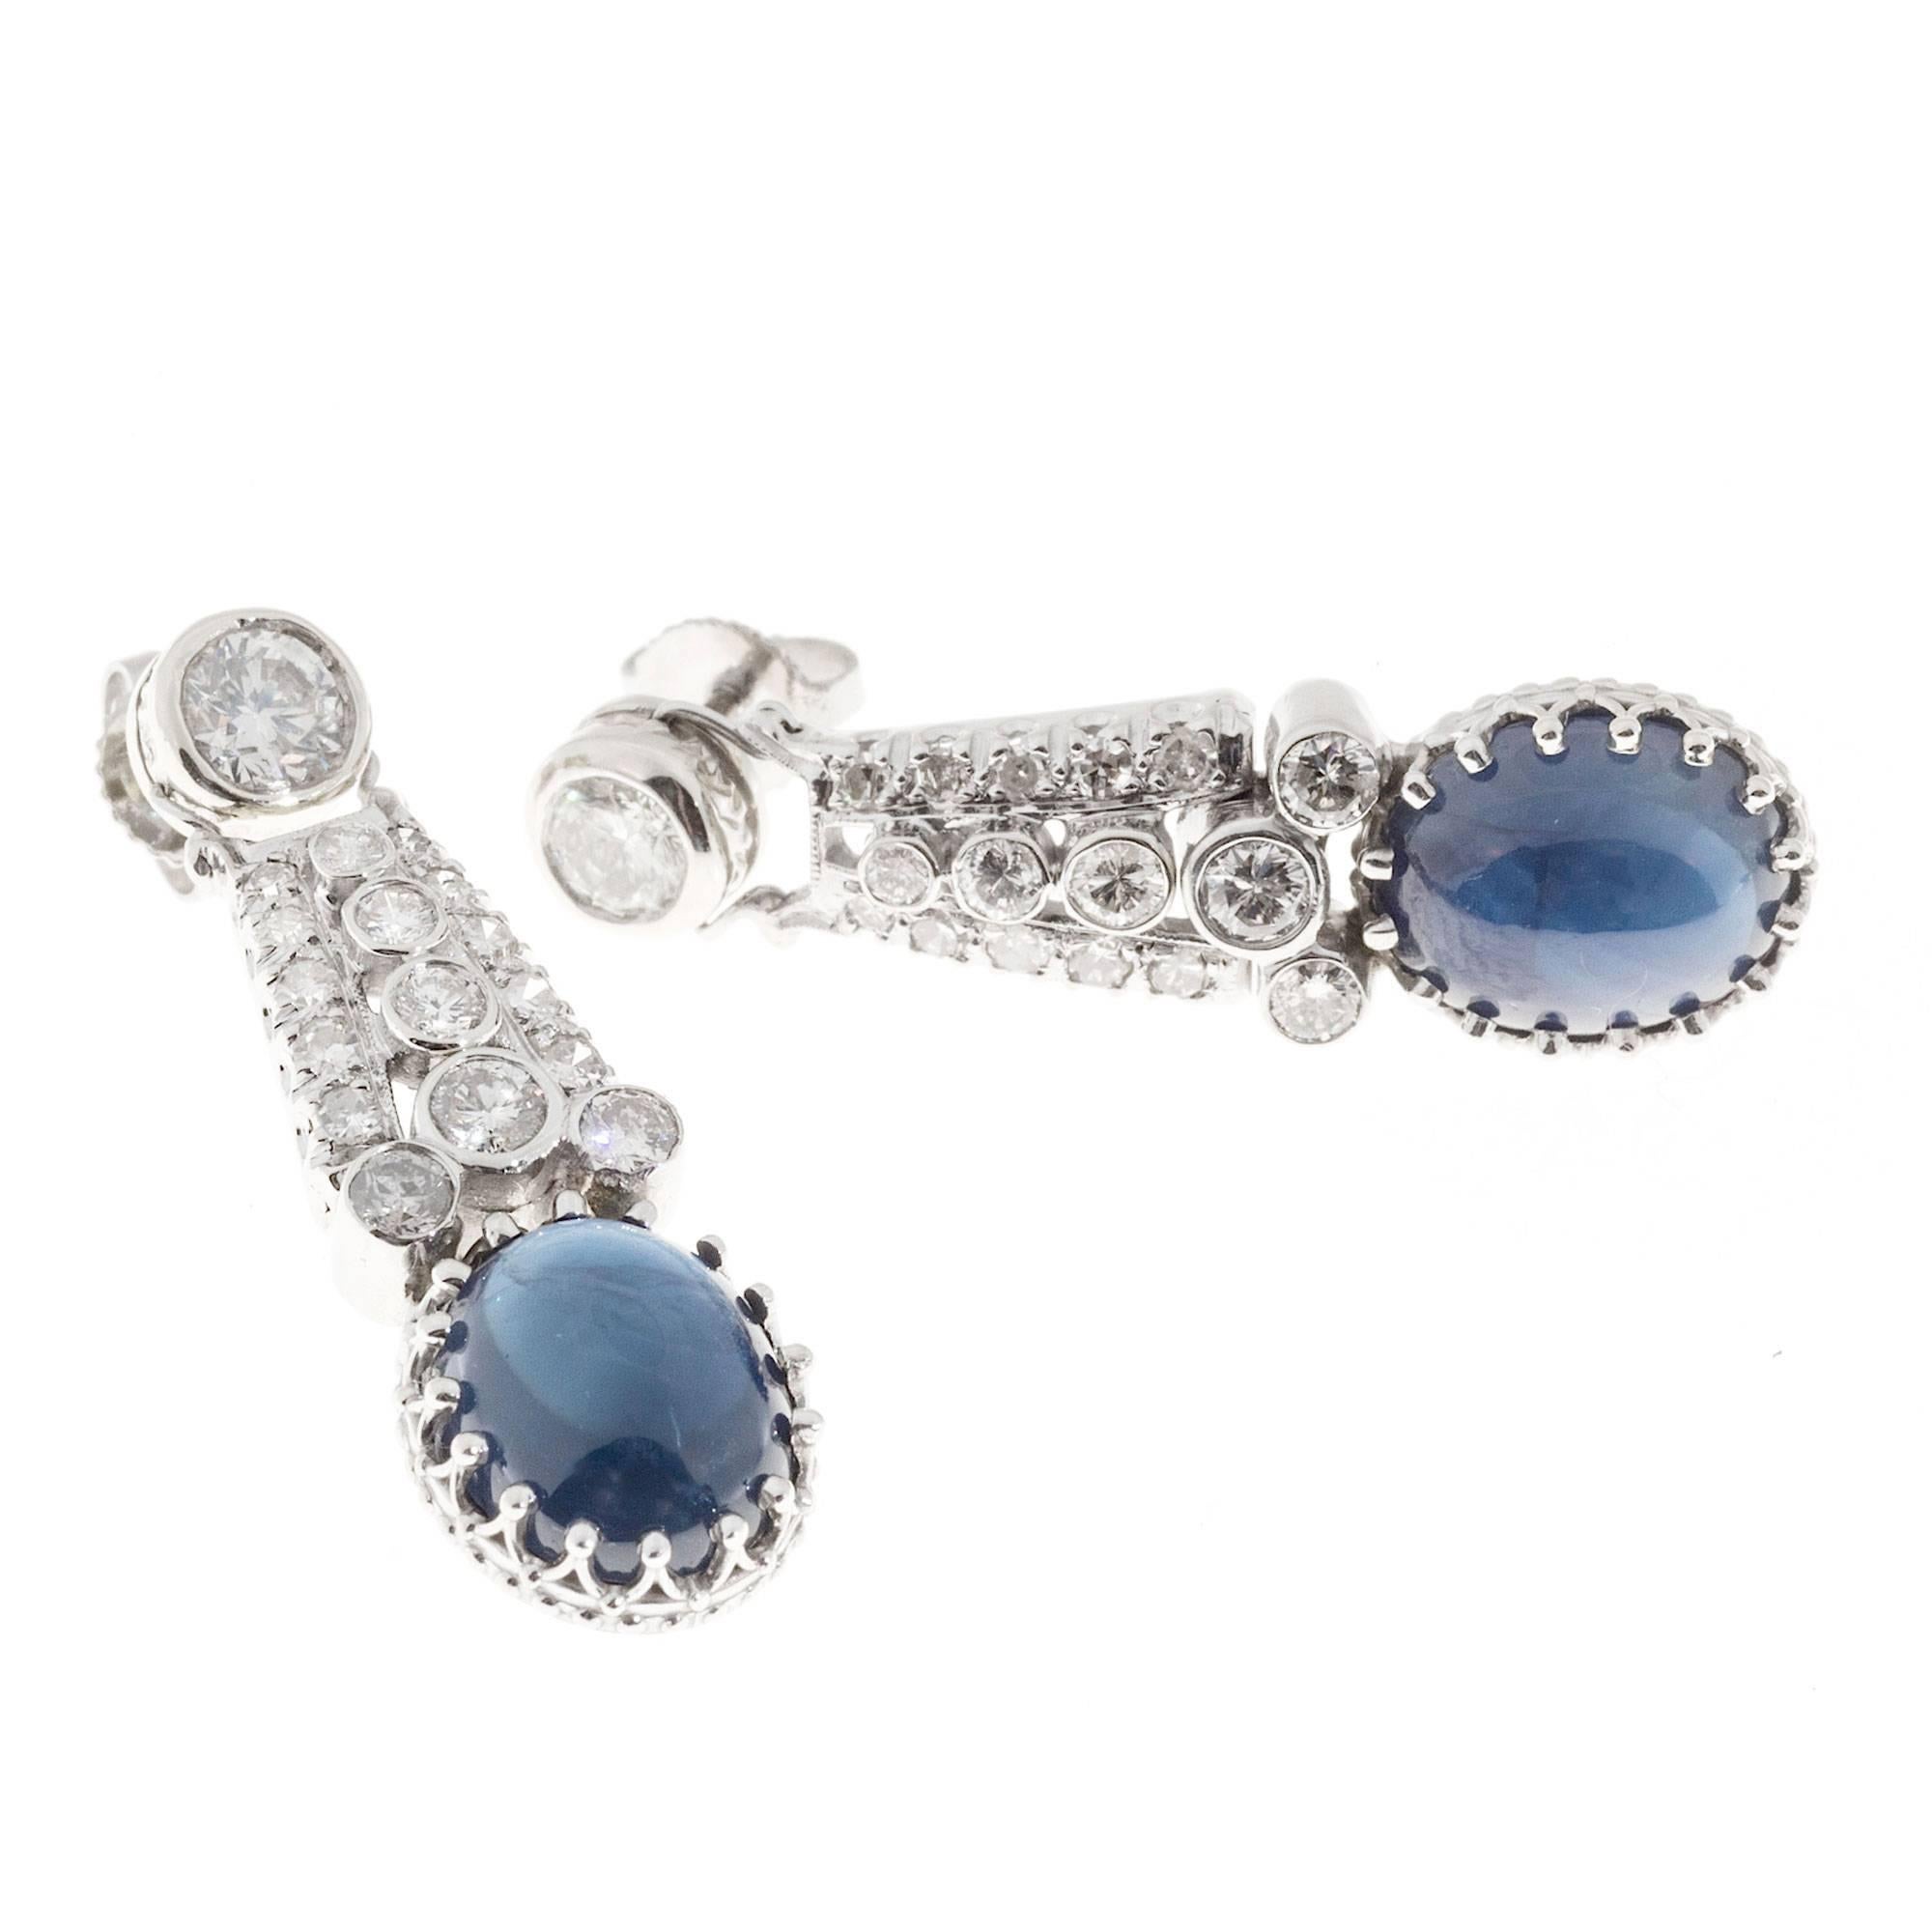 1920-1929 dangle earrings. Platinum and white gold. The center   diamond sections are handmade Platinum with white diamonds. At the top is a white gold handmade engraved side bezel set   with very bright transitional cut diamonds. At the bottom are